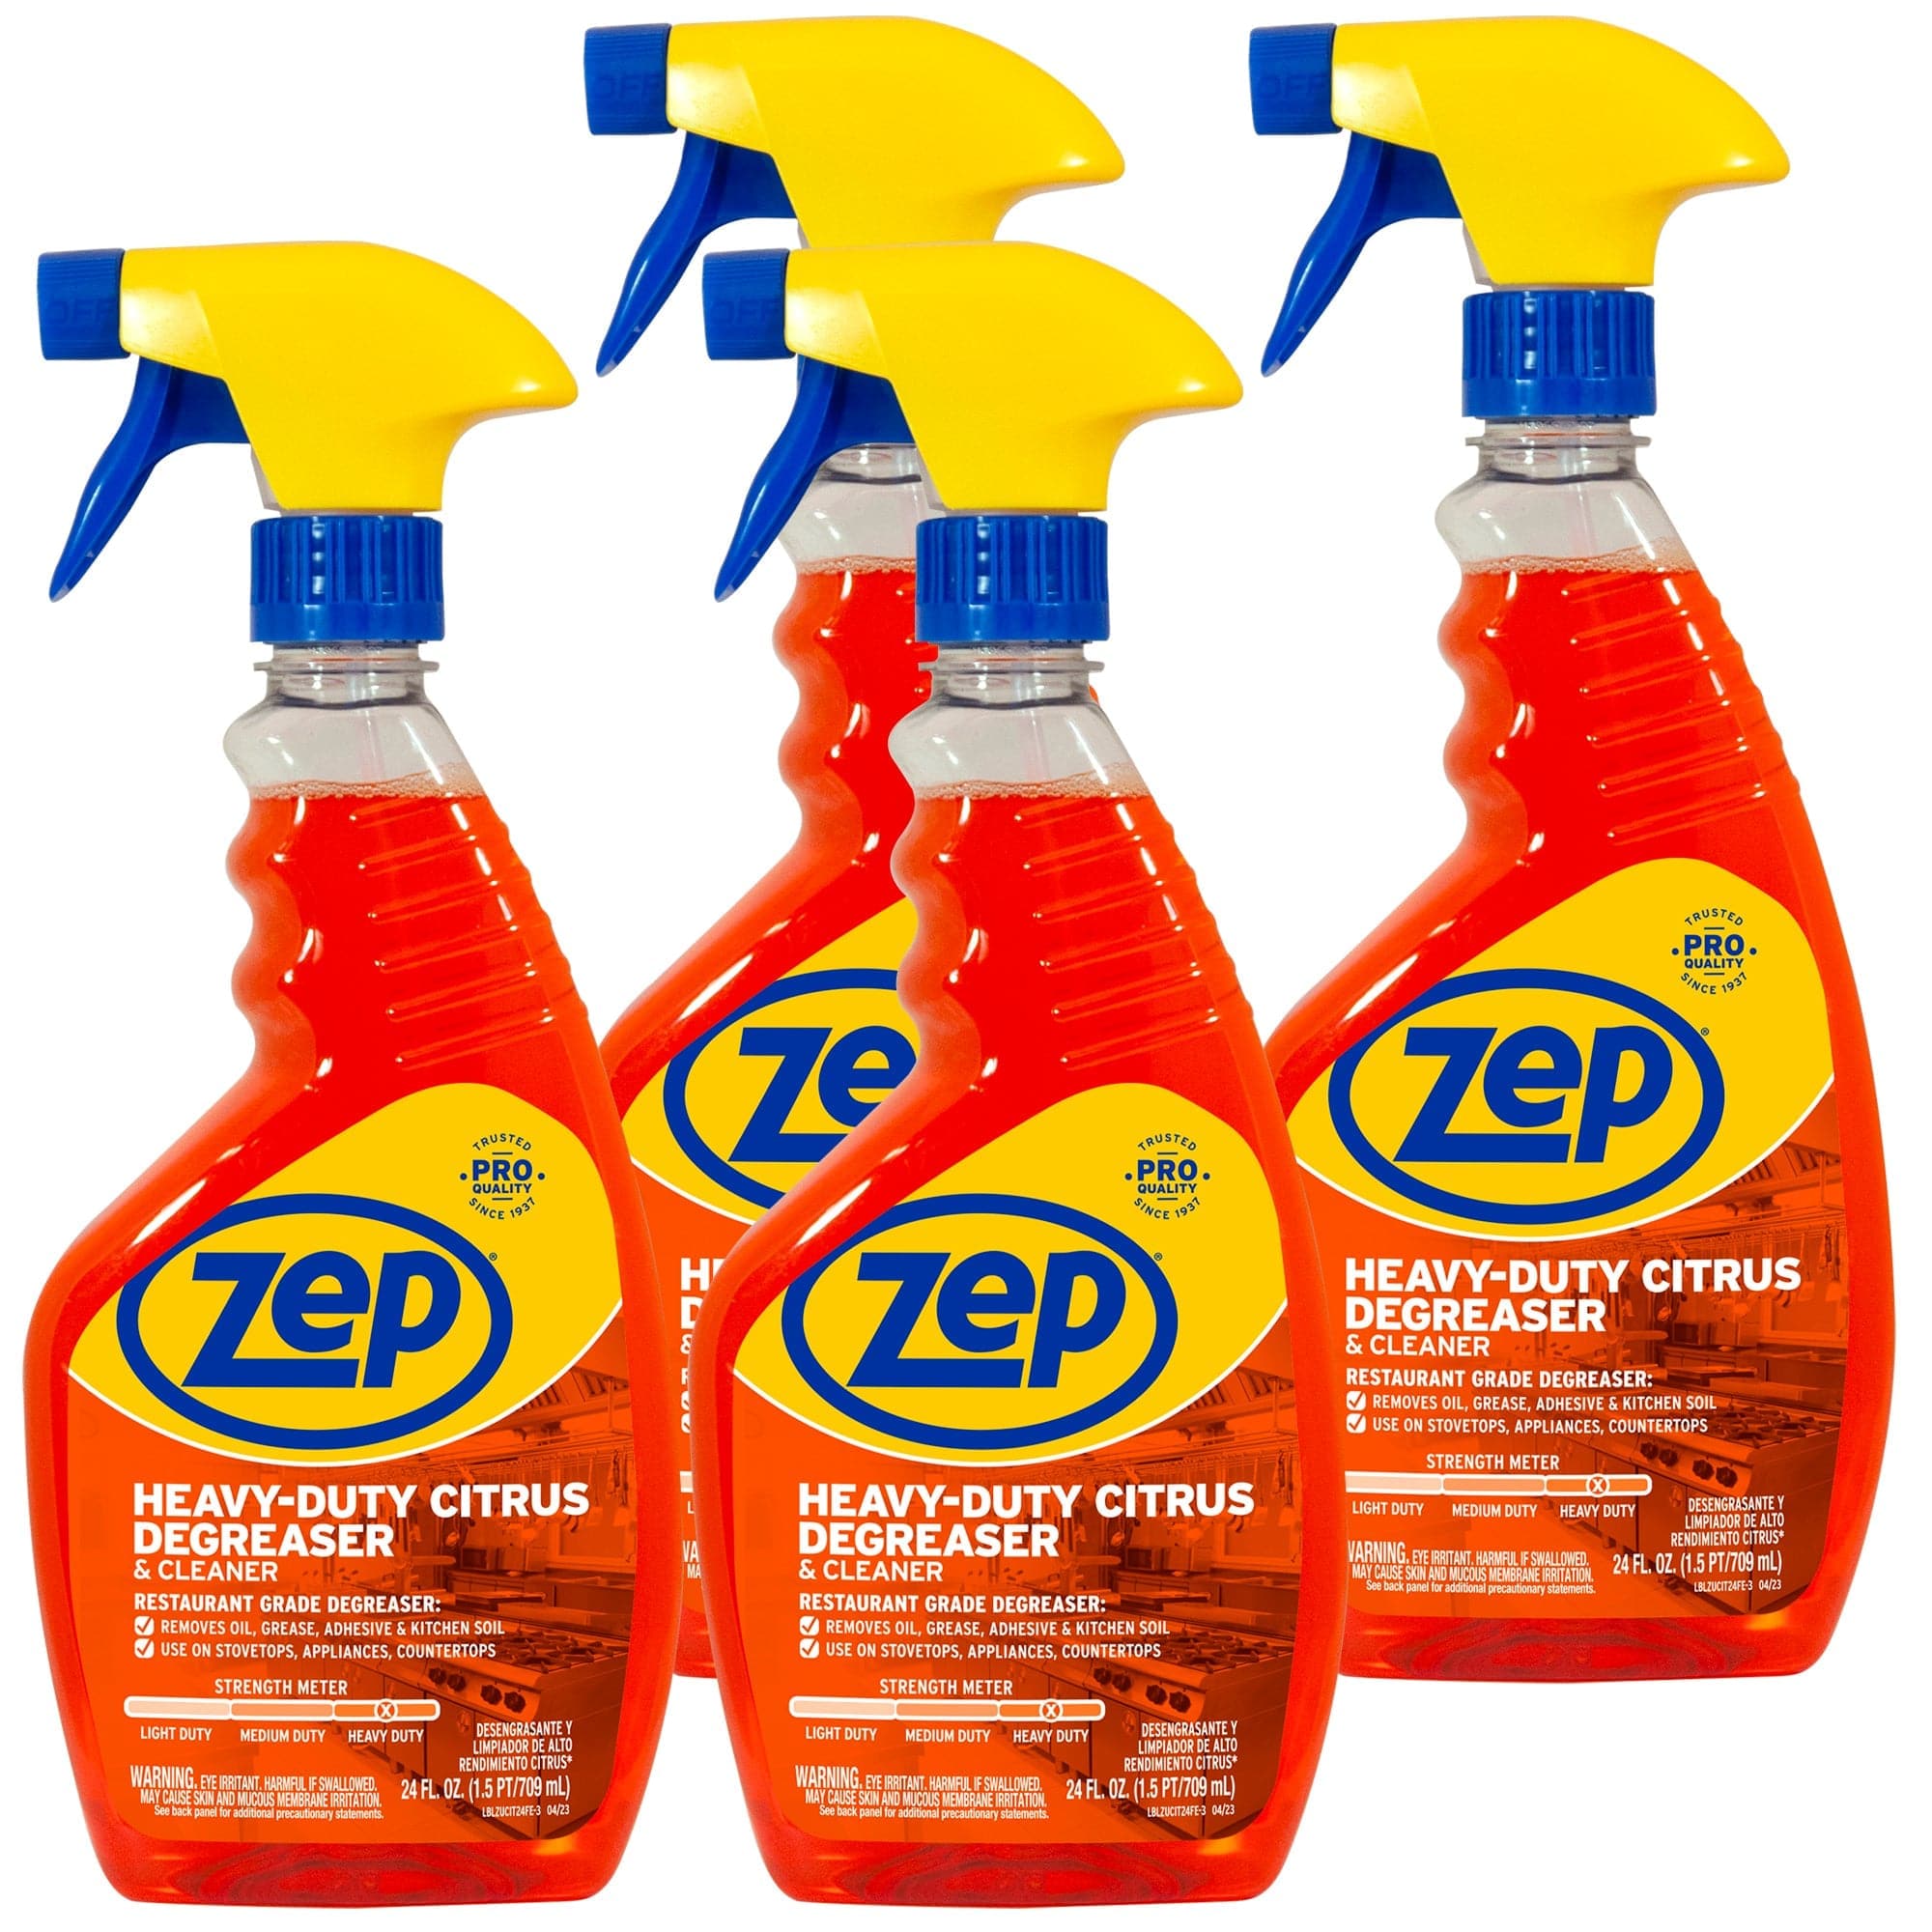 Comparisons of kitchen degreasers #zepdegreaser #morethancleaning #mas, zep degreaser